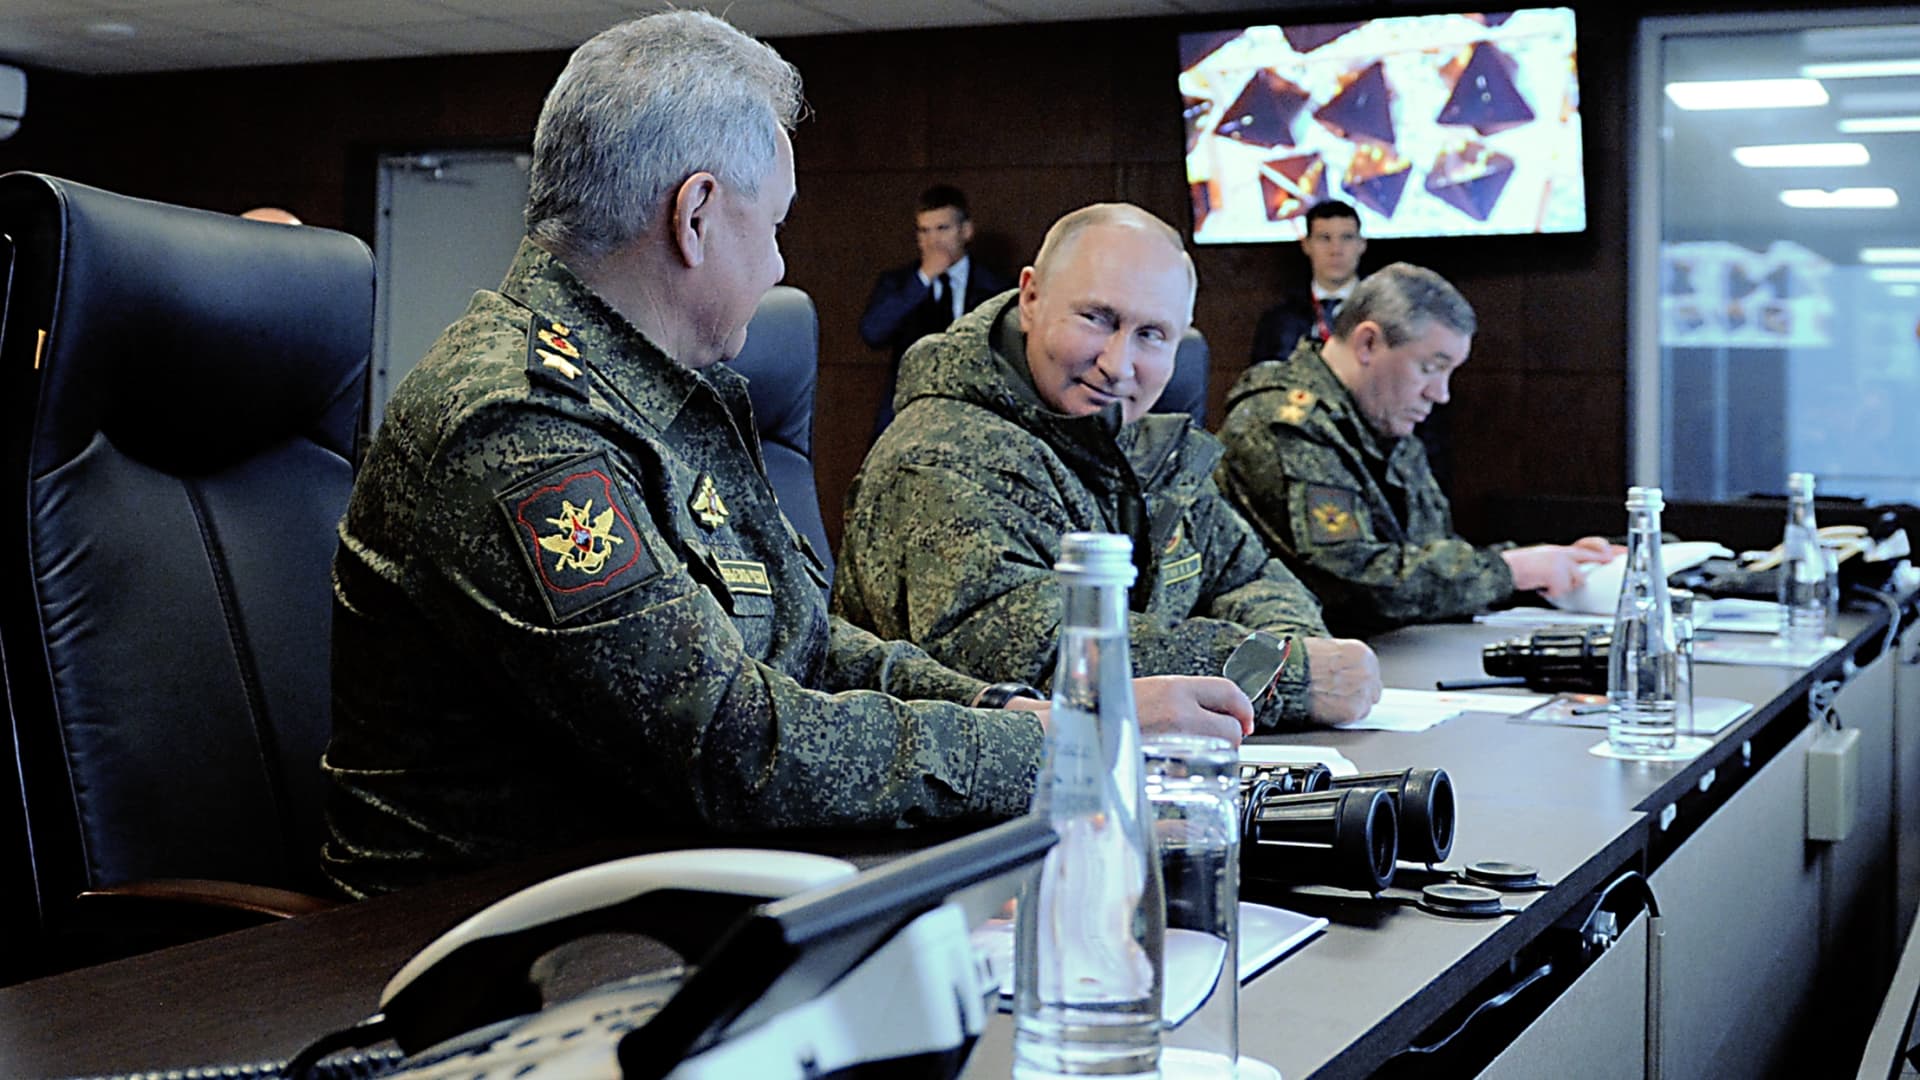 Russian President Vladimir Putin (C), accompanied by Defence Minister Sergei Shoigu (L) and Valery Gerasimov, the chief of the Russian General Staff, oversees the 'Vostok-2022' military exercises at the Sergeevskyi training ground outside the city of Ussuriysk on the Russian Far East on September 6, 2022.